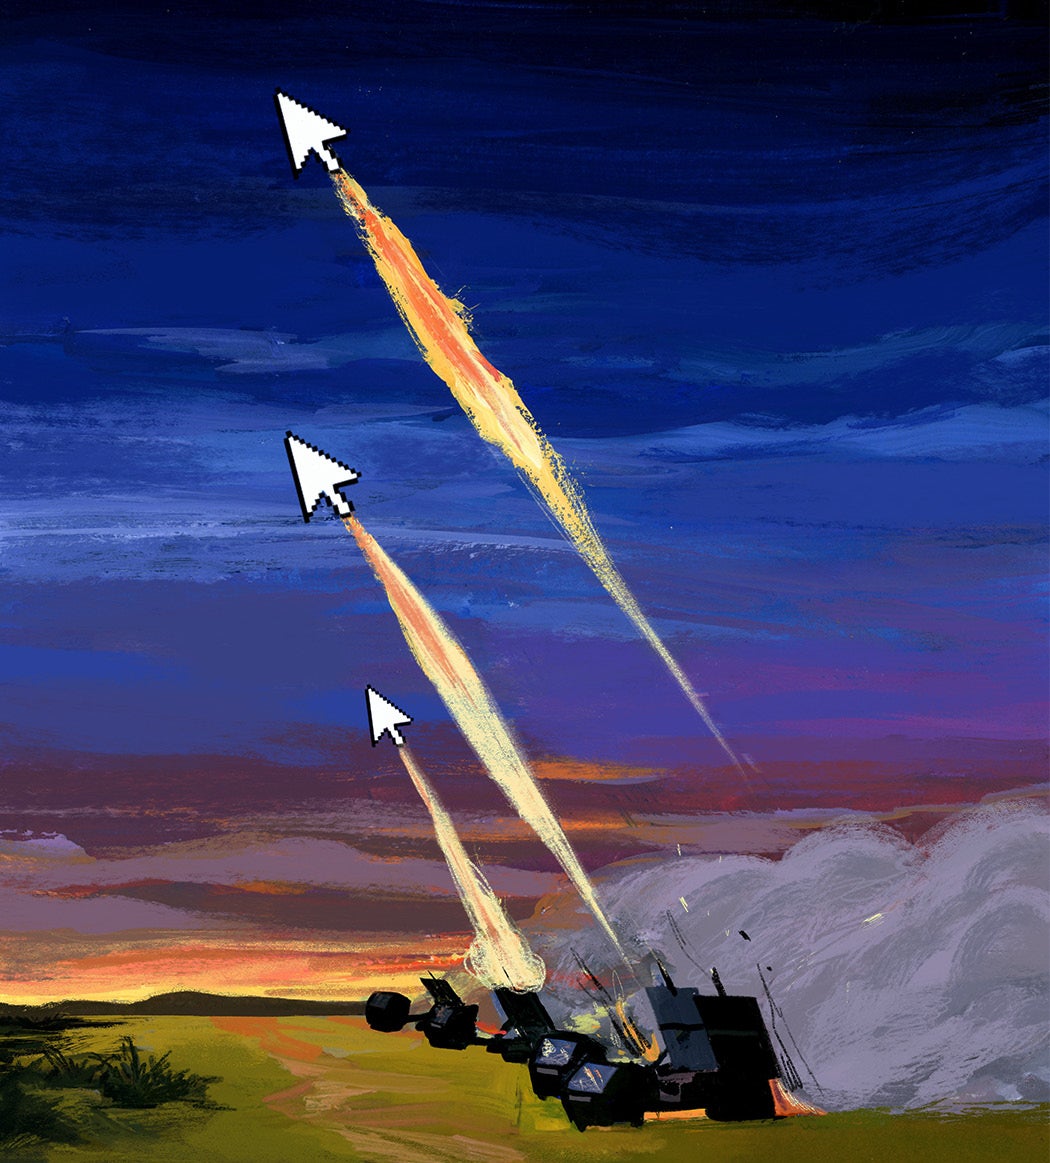 An illustrated battle scene where cursor arrows are being launched